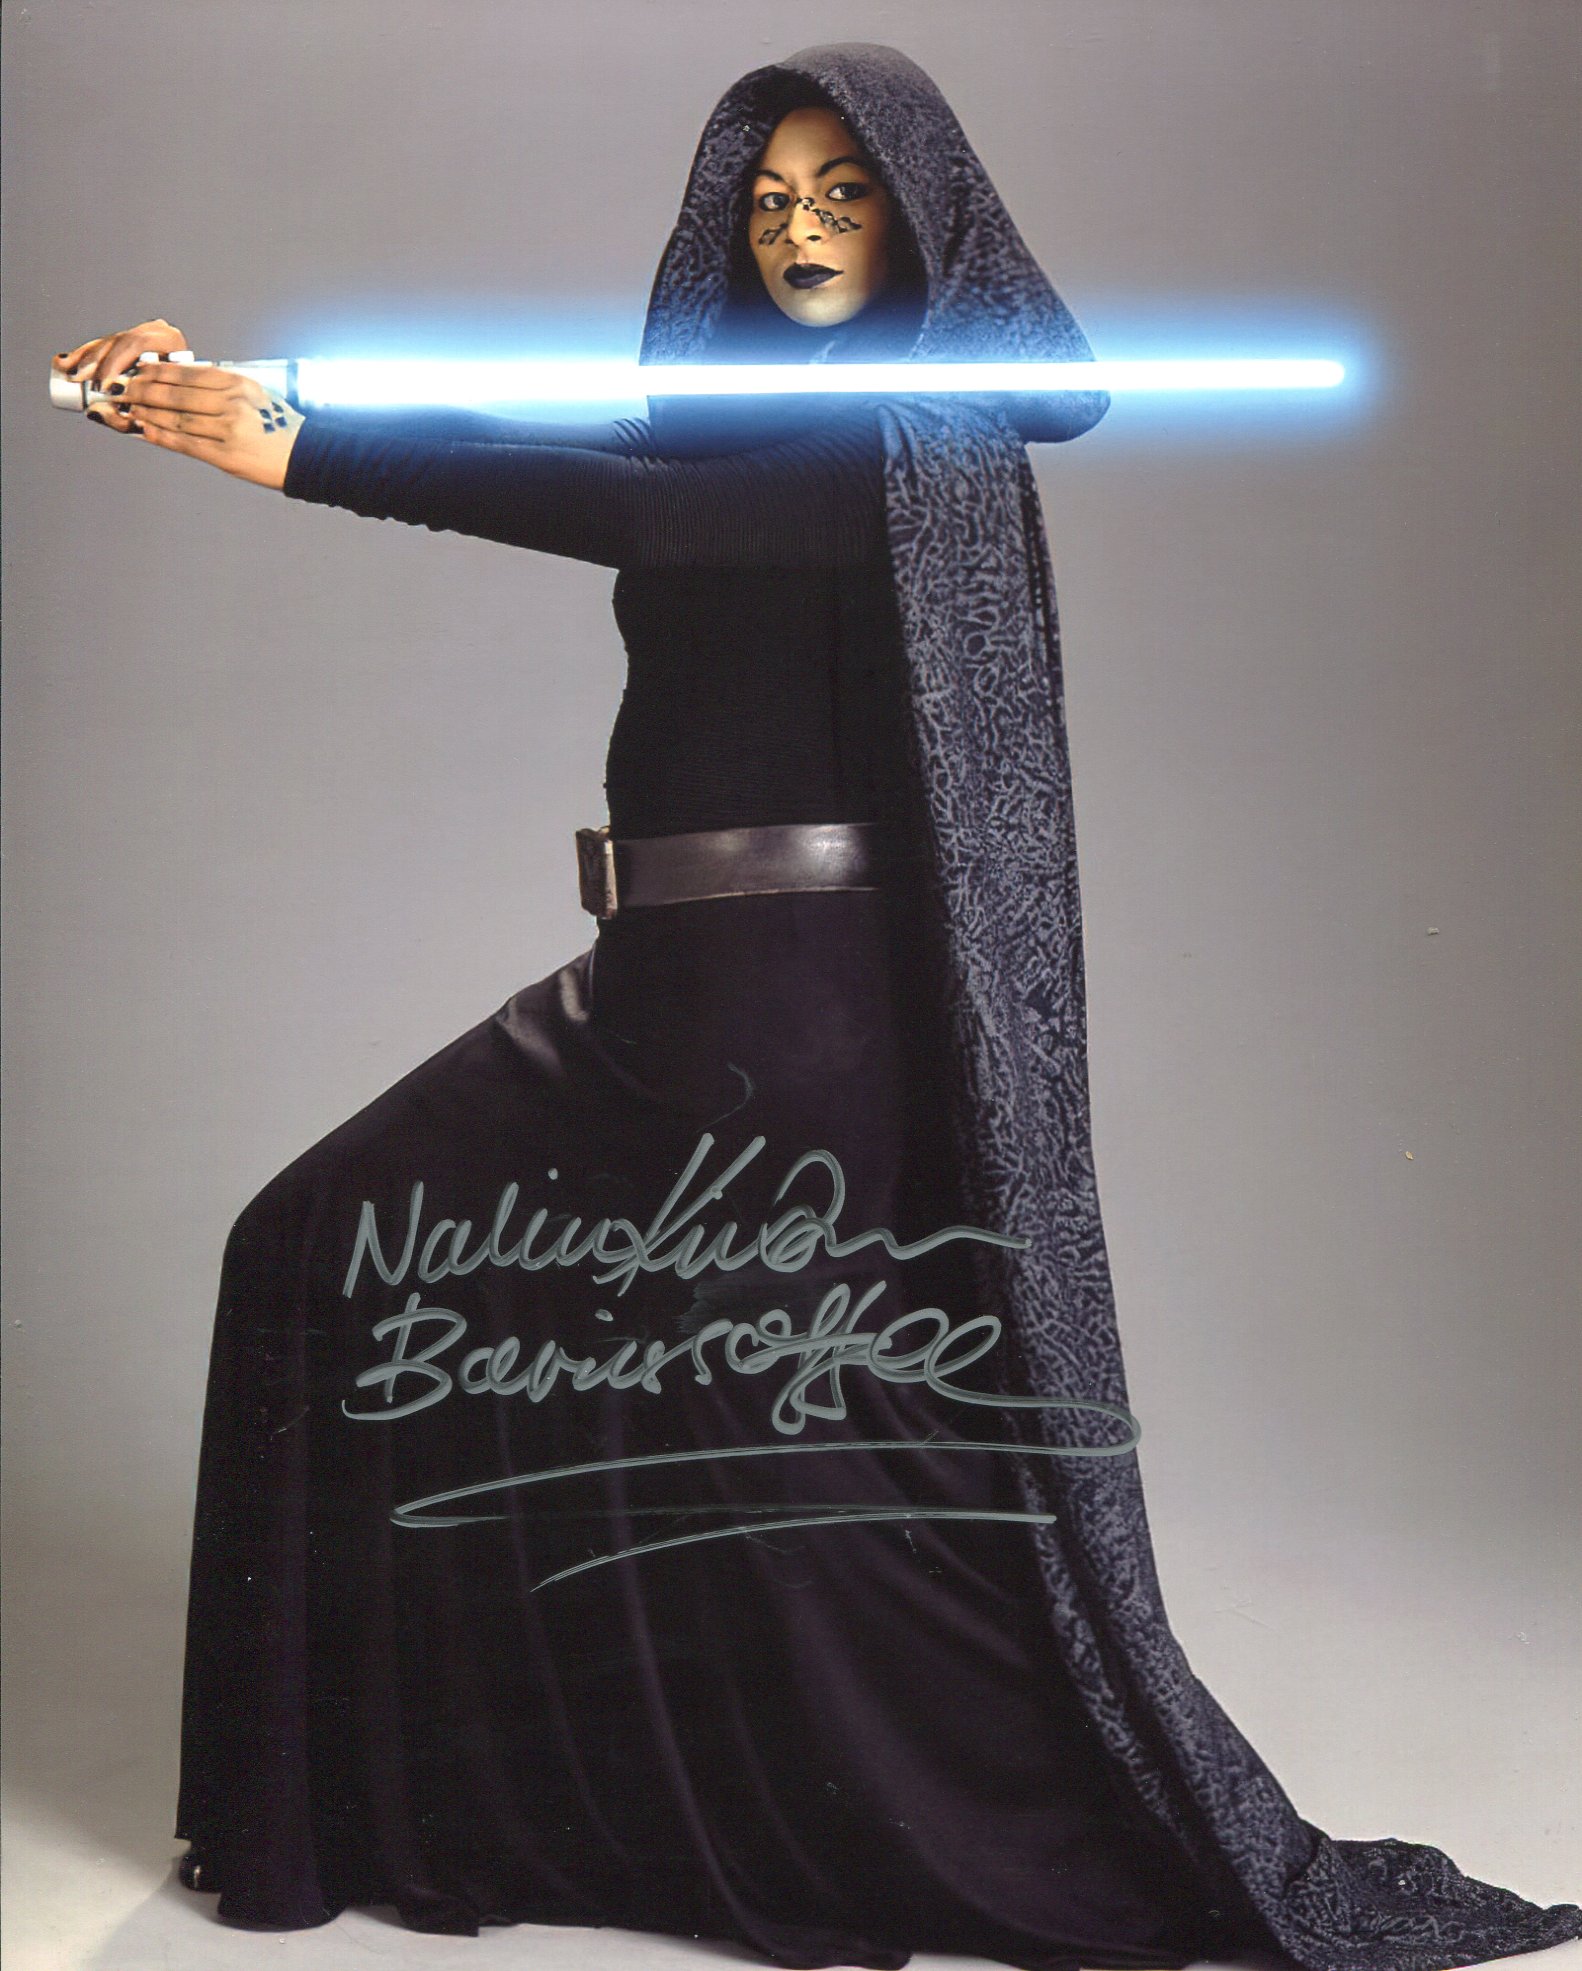 Star Wars 8x10 photo signed by actress Nalini Krishan as Barris Offee in Attack of the Clones.